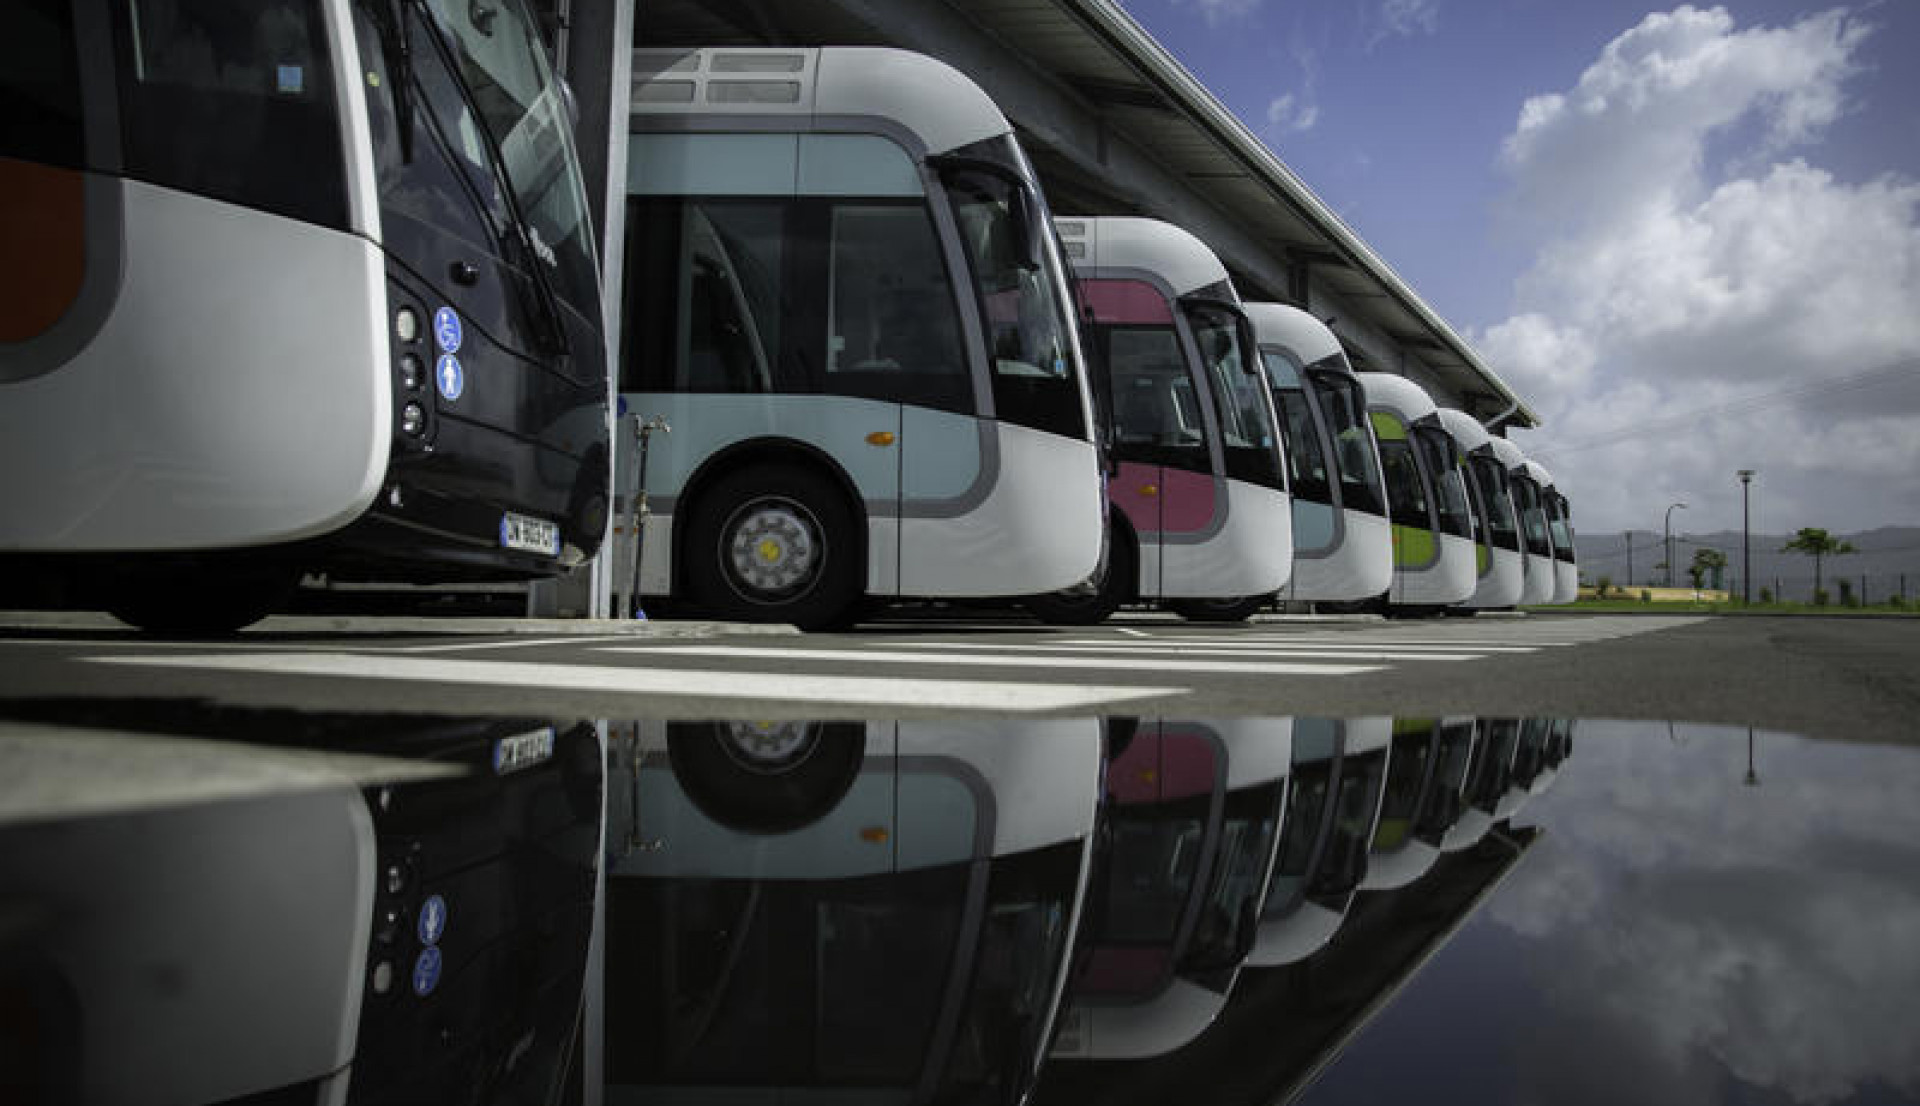 With the support of a €200 million soft loan from the European Investment Bank, 29 cities across Ukraine will receive almost 1,000 mass transit vehicles